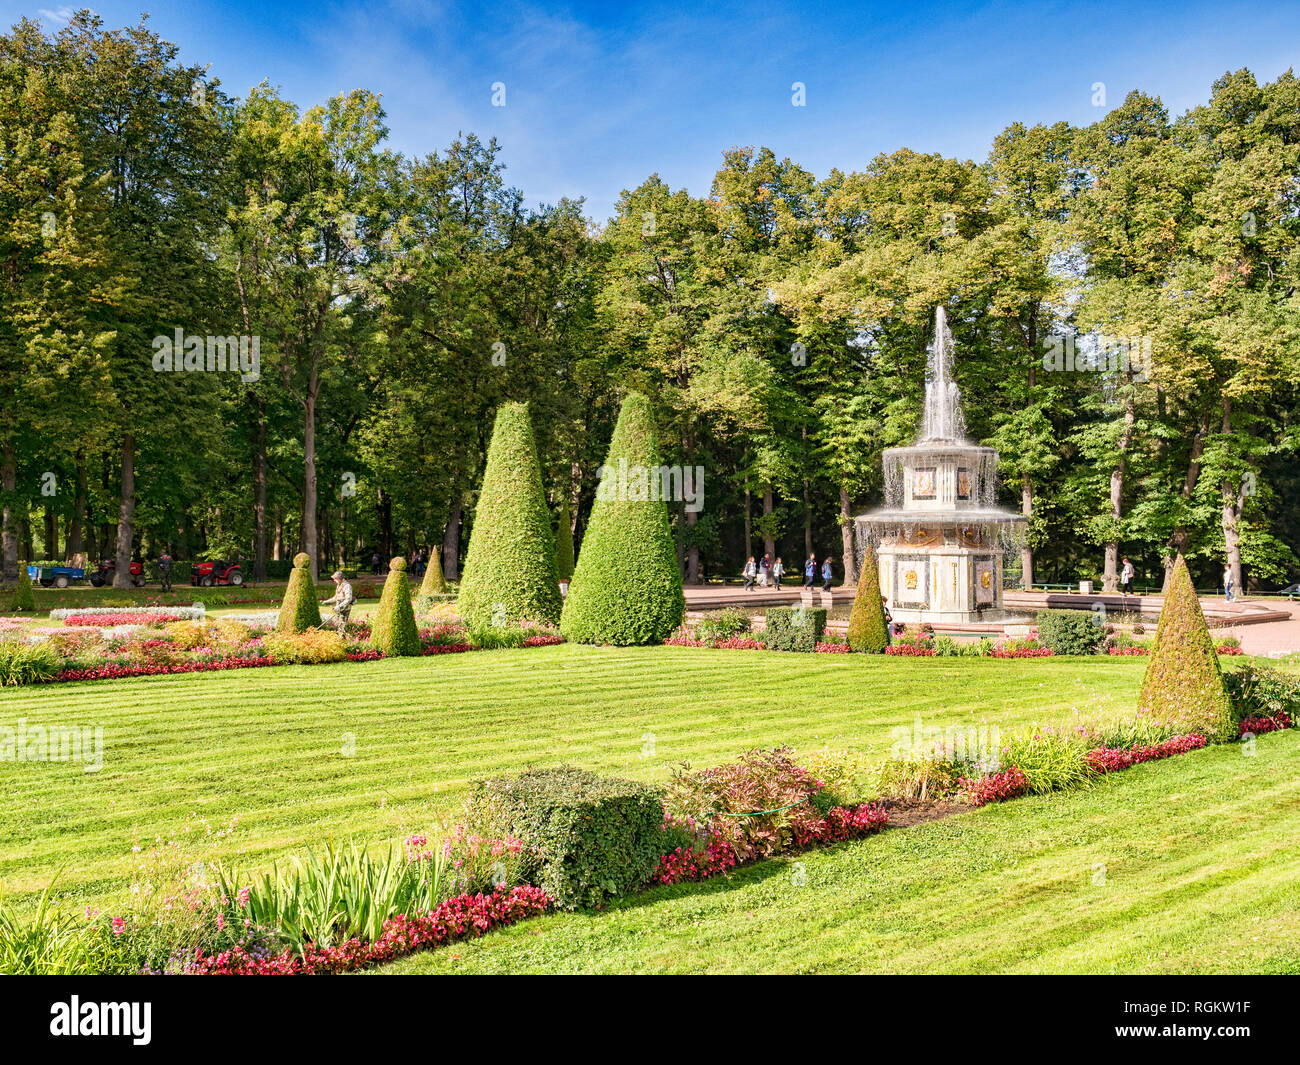 18 September 2018: St Petersburg, Russia - Peterhof Palace Gardens, with topiary and Wedding Cake Fountain. Stock Photo